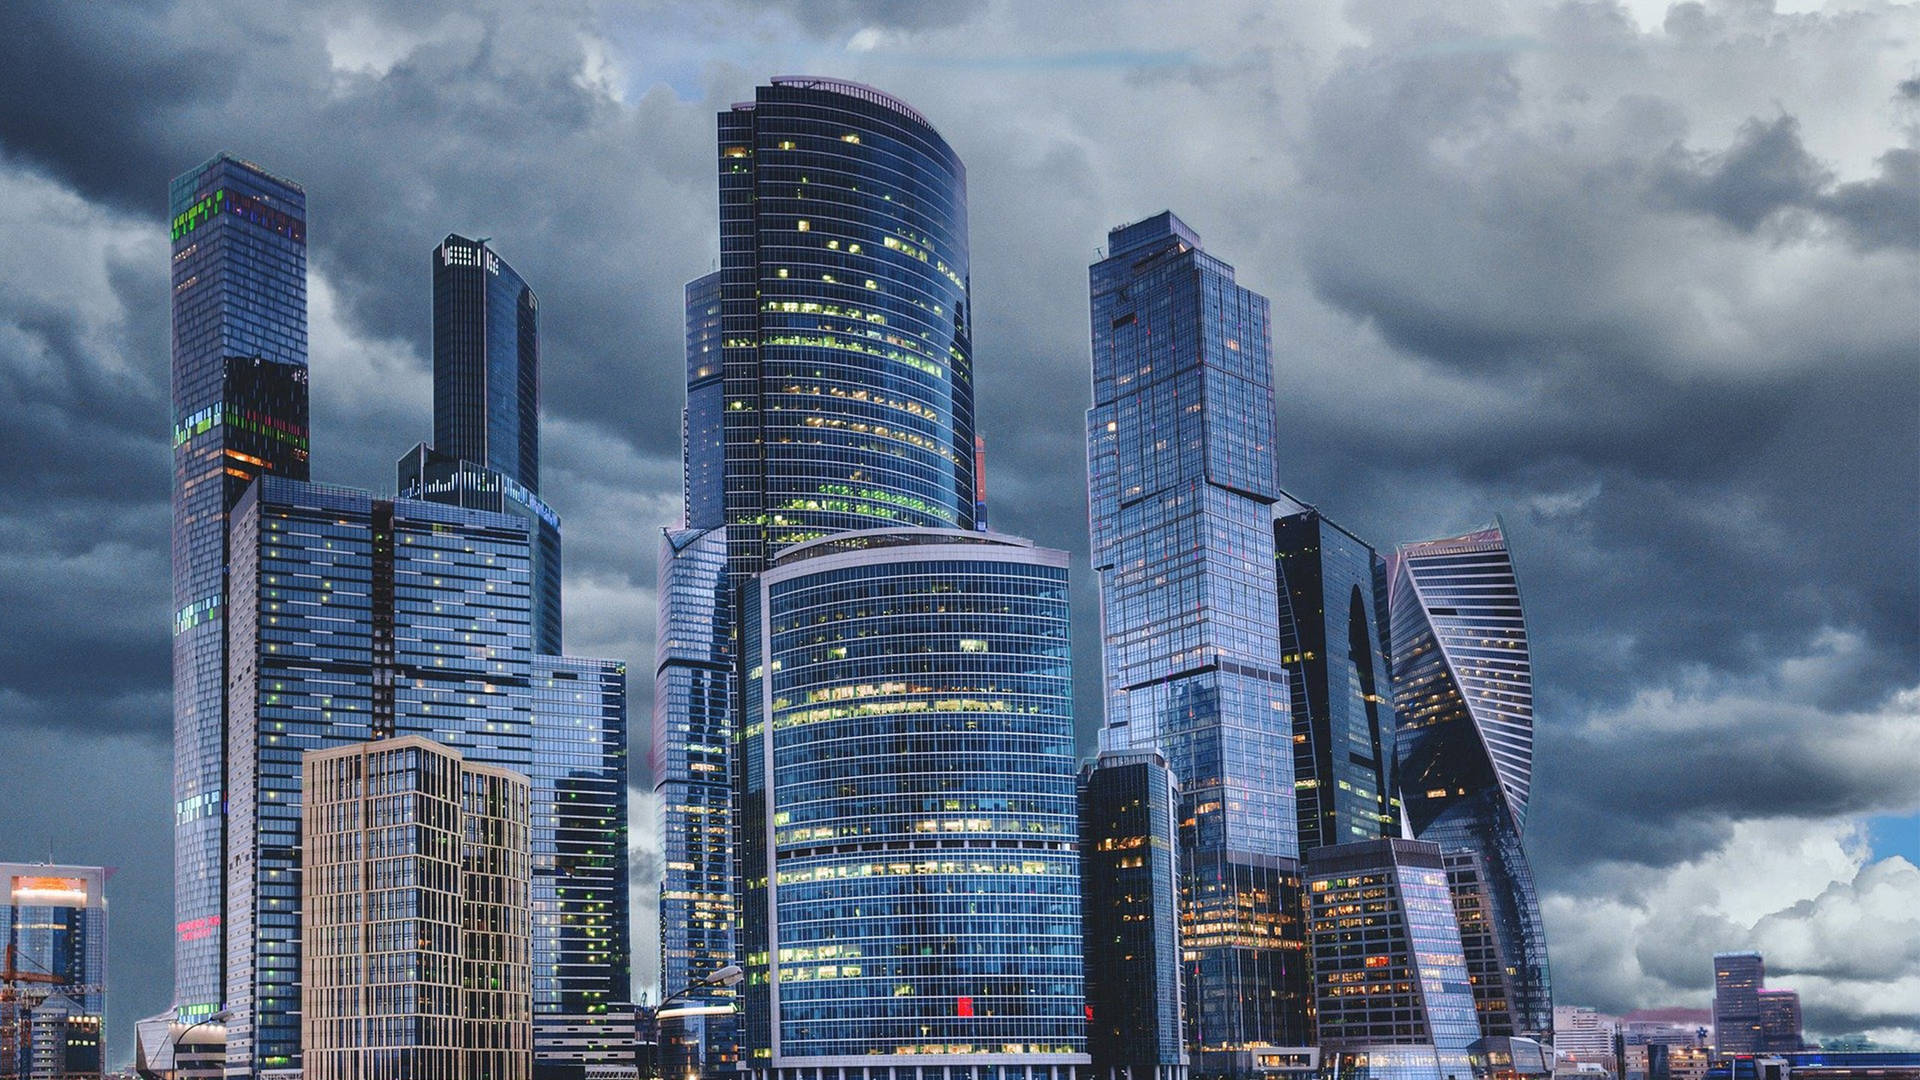 Architecture Moscow City Megalopolis Background